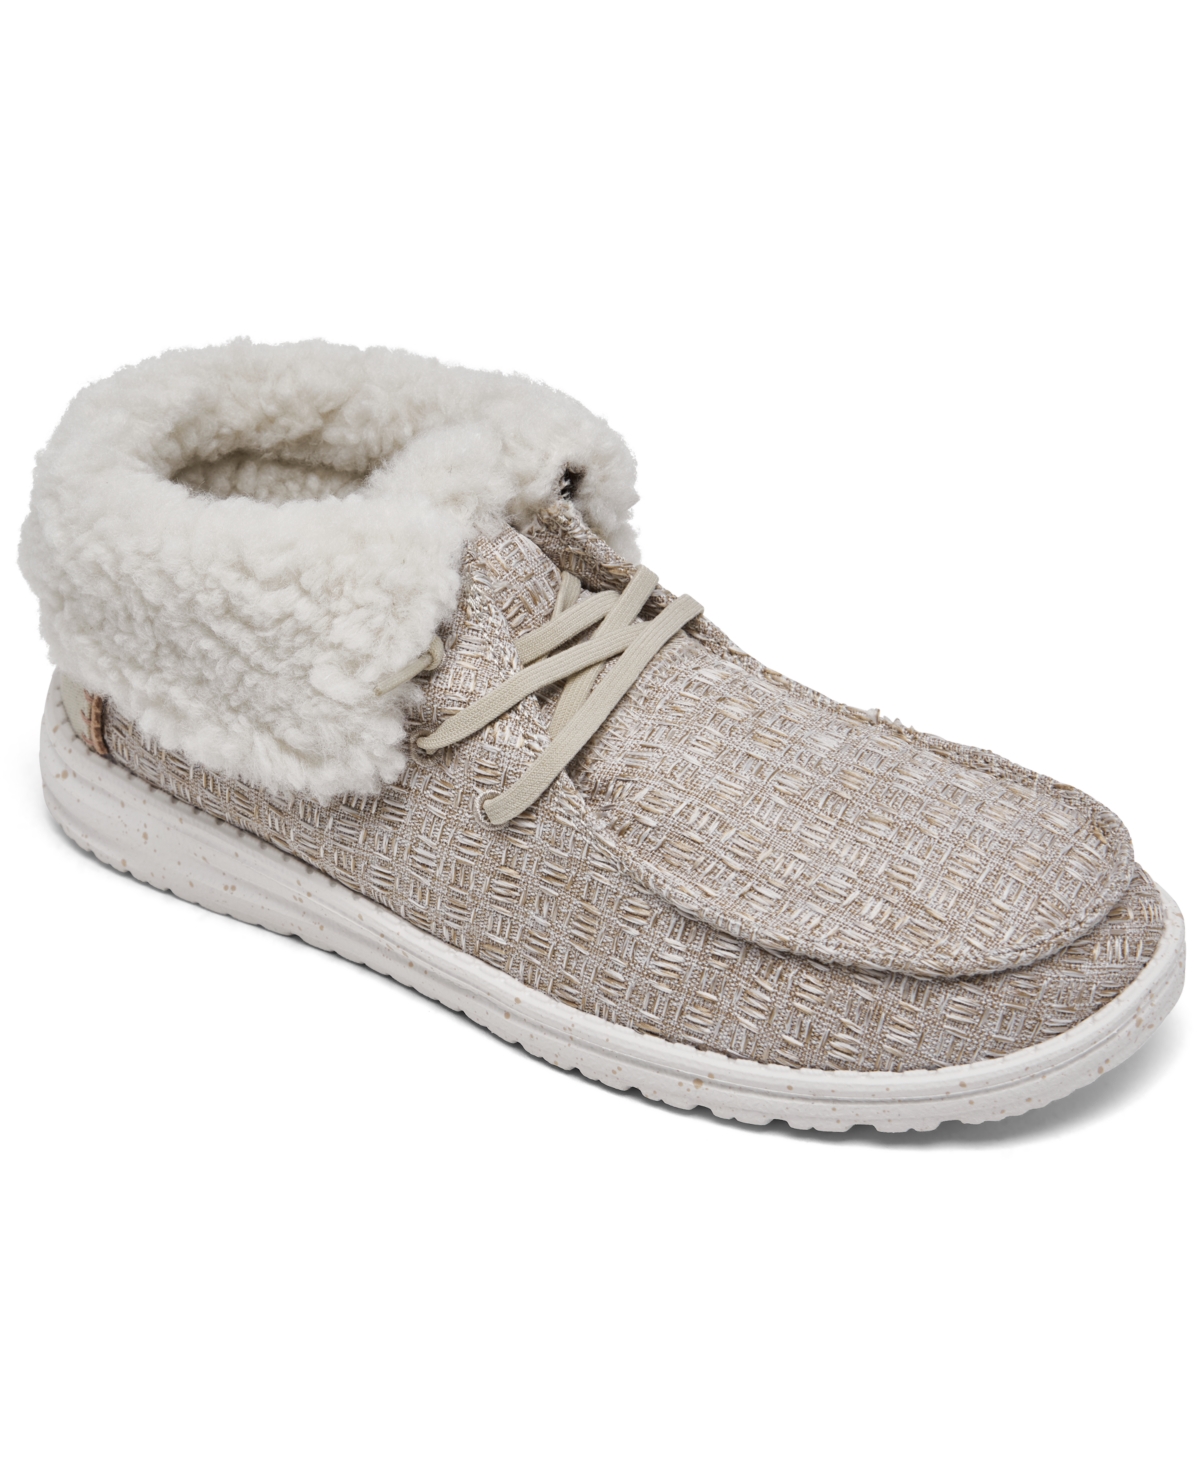 Women's Wendy Fold Casual Moccasin Sneakers from Finish Line - Tan